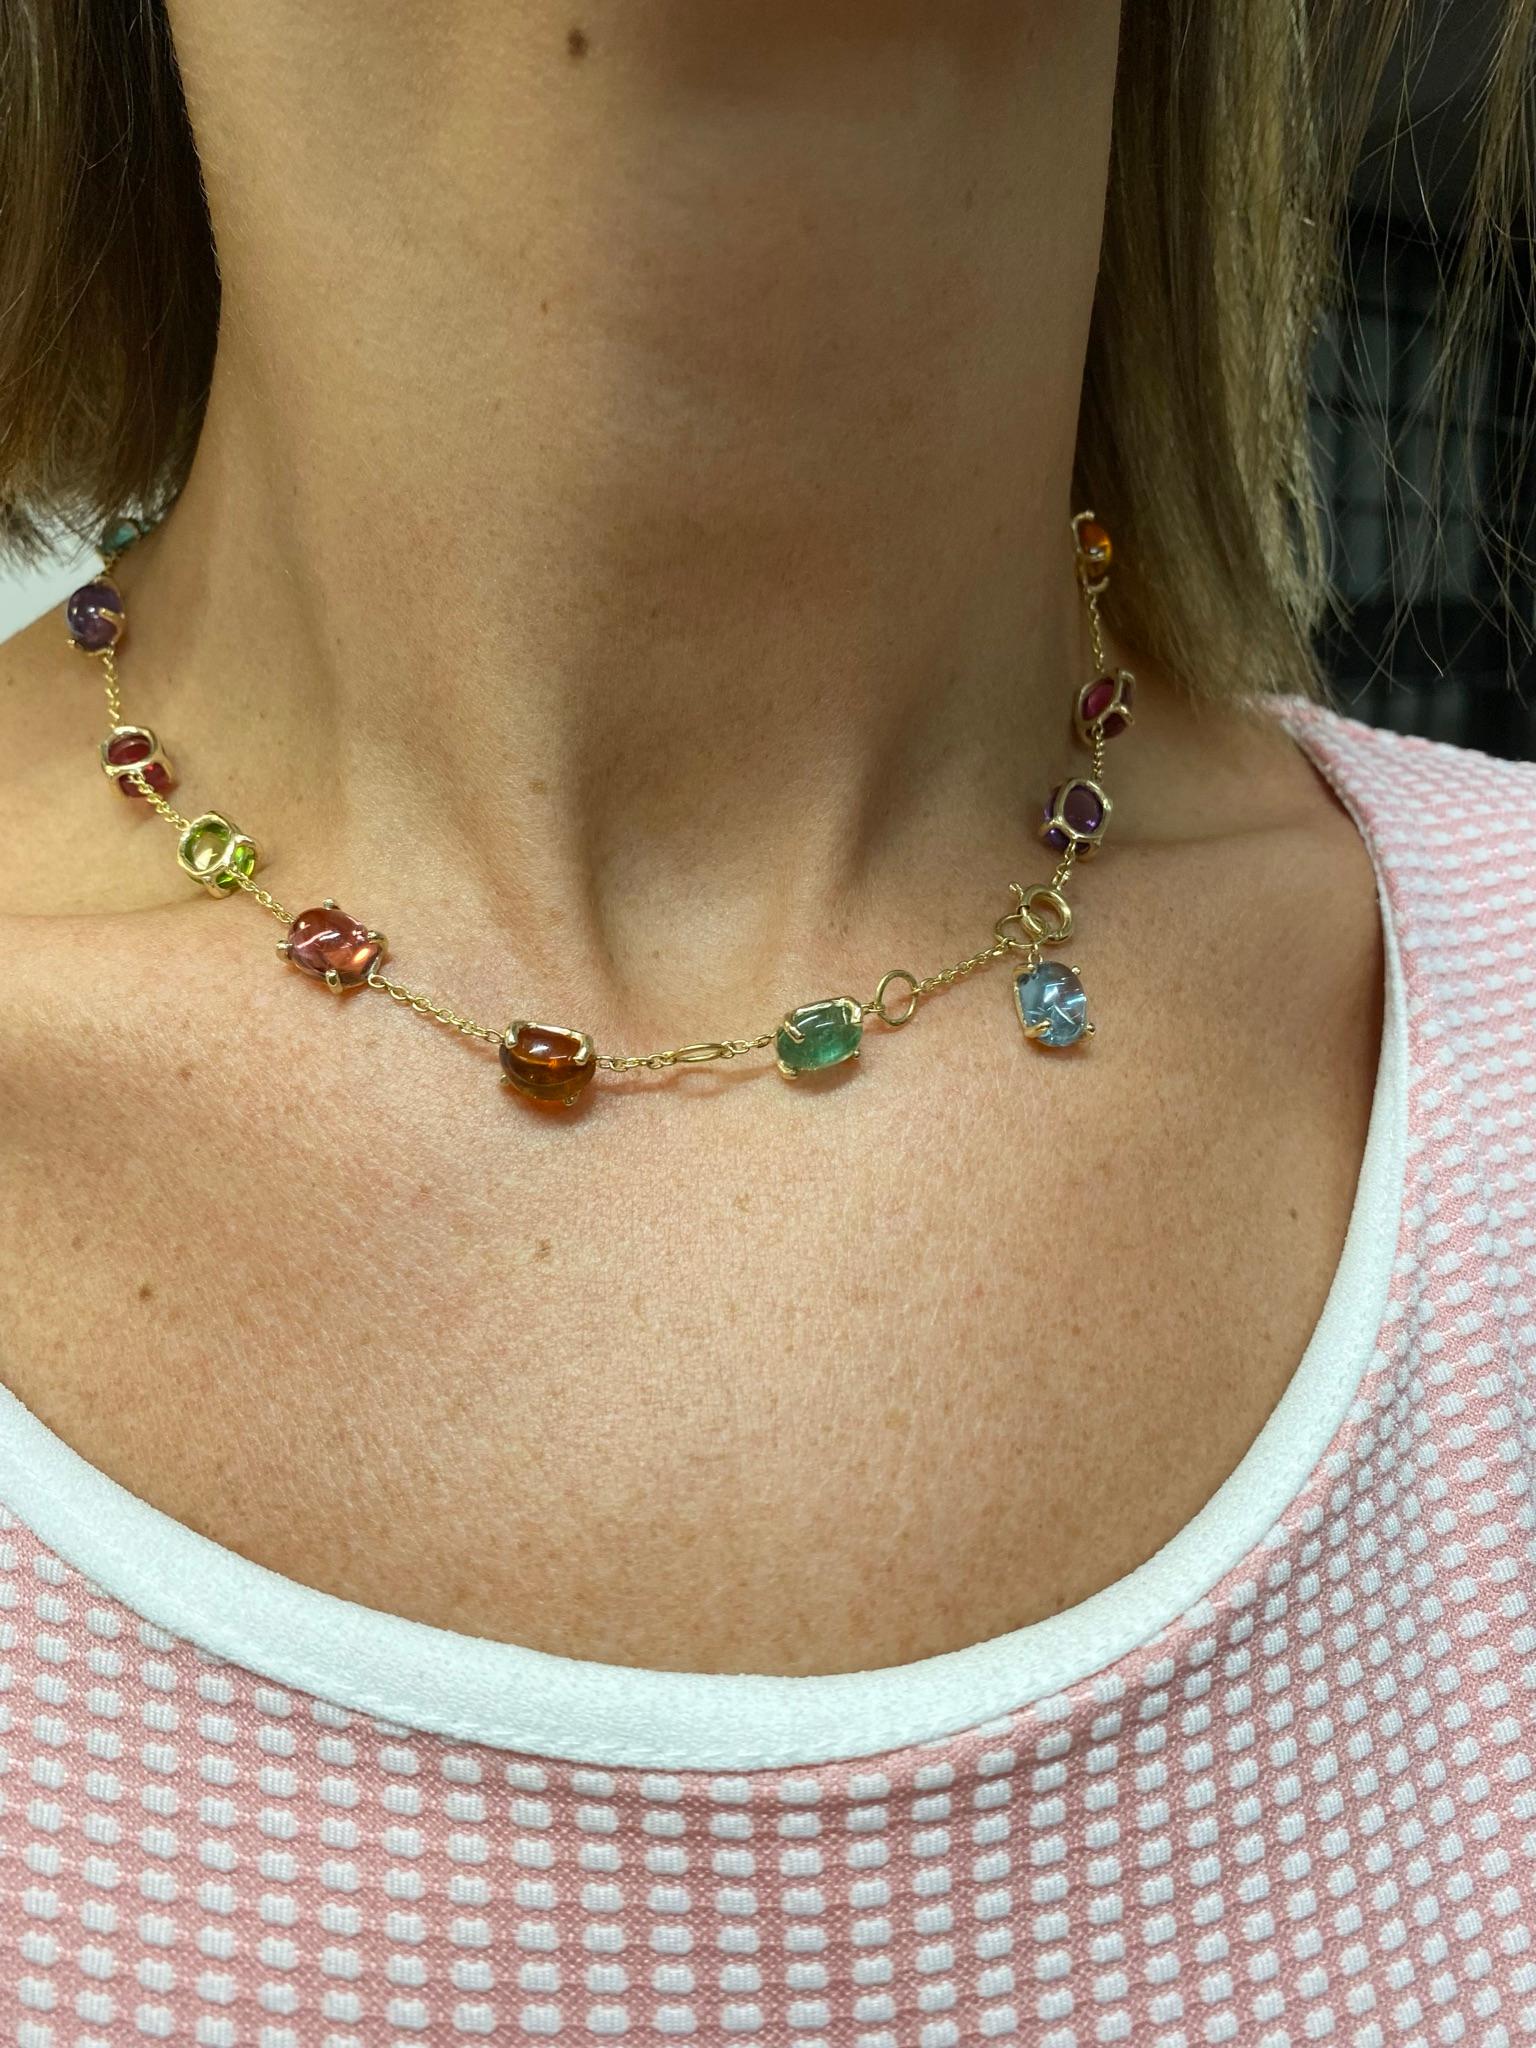 Rossella Ugolini Design Collection, 18 Karat Yellow Gold Elegant Necklace Oval cut Amethyst Garnet Citrine Peridot Tourmaline
A Elegant necklace with colored stones made of one line of the 18 Karat yellow gold chain embellished with 18 th stones: